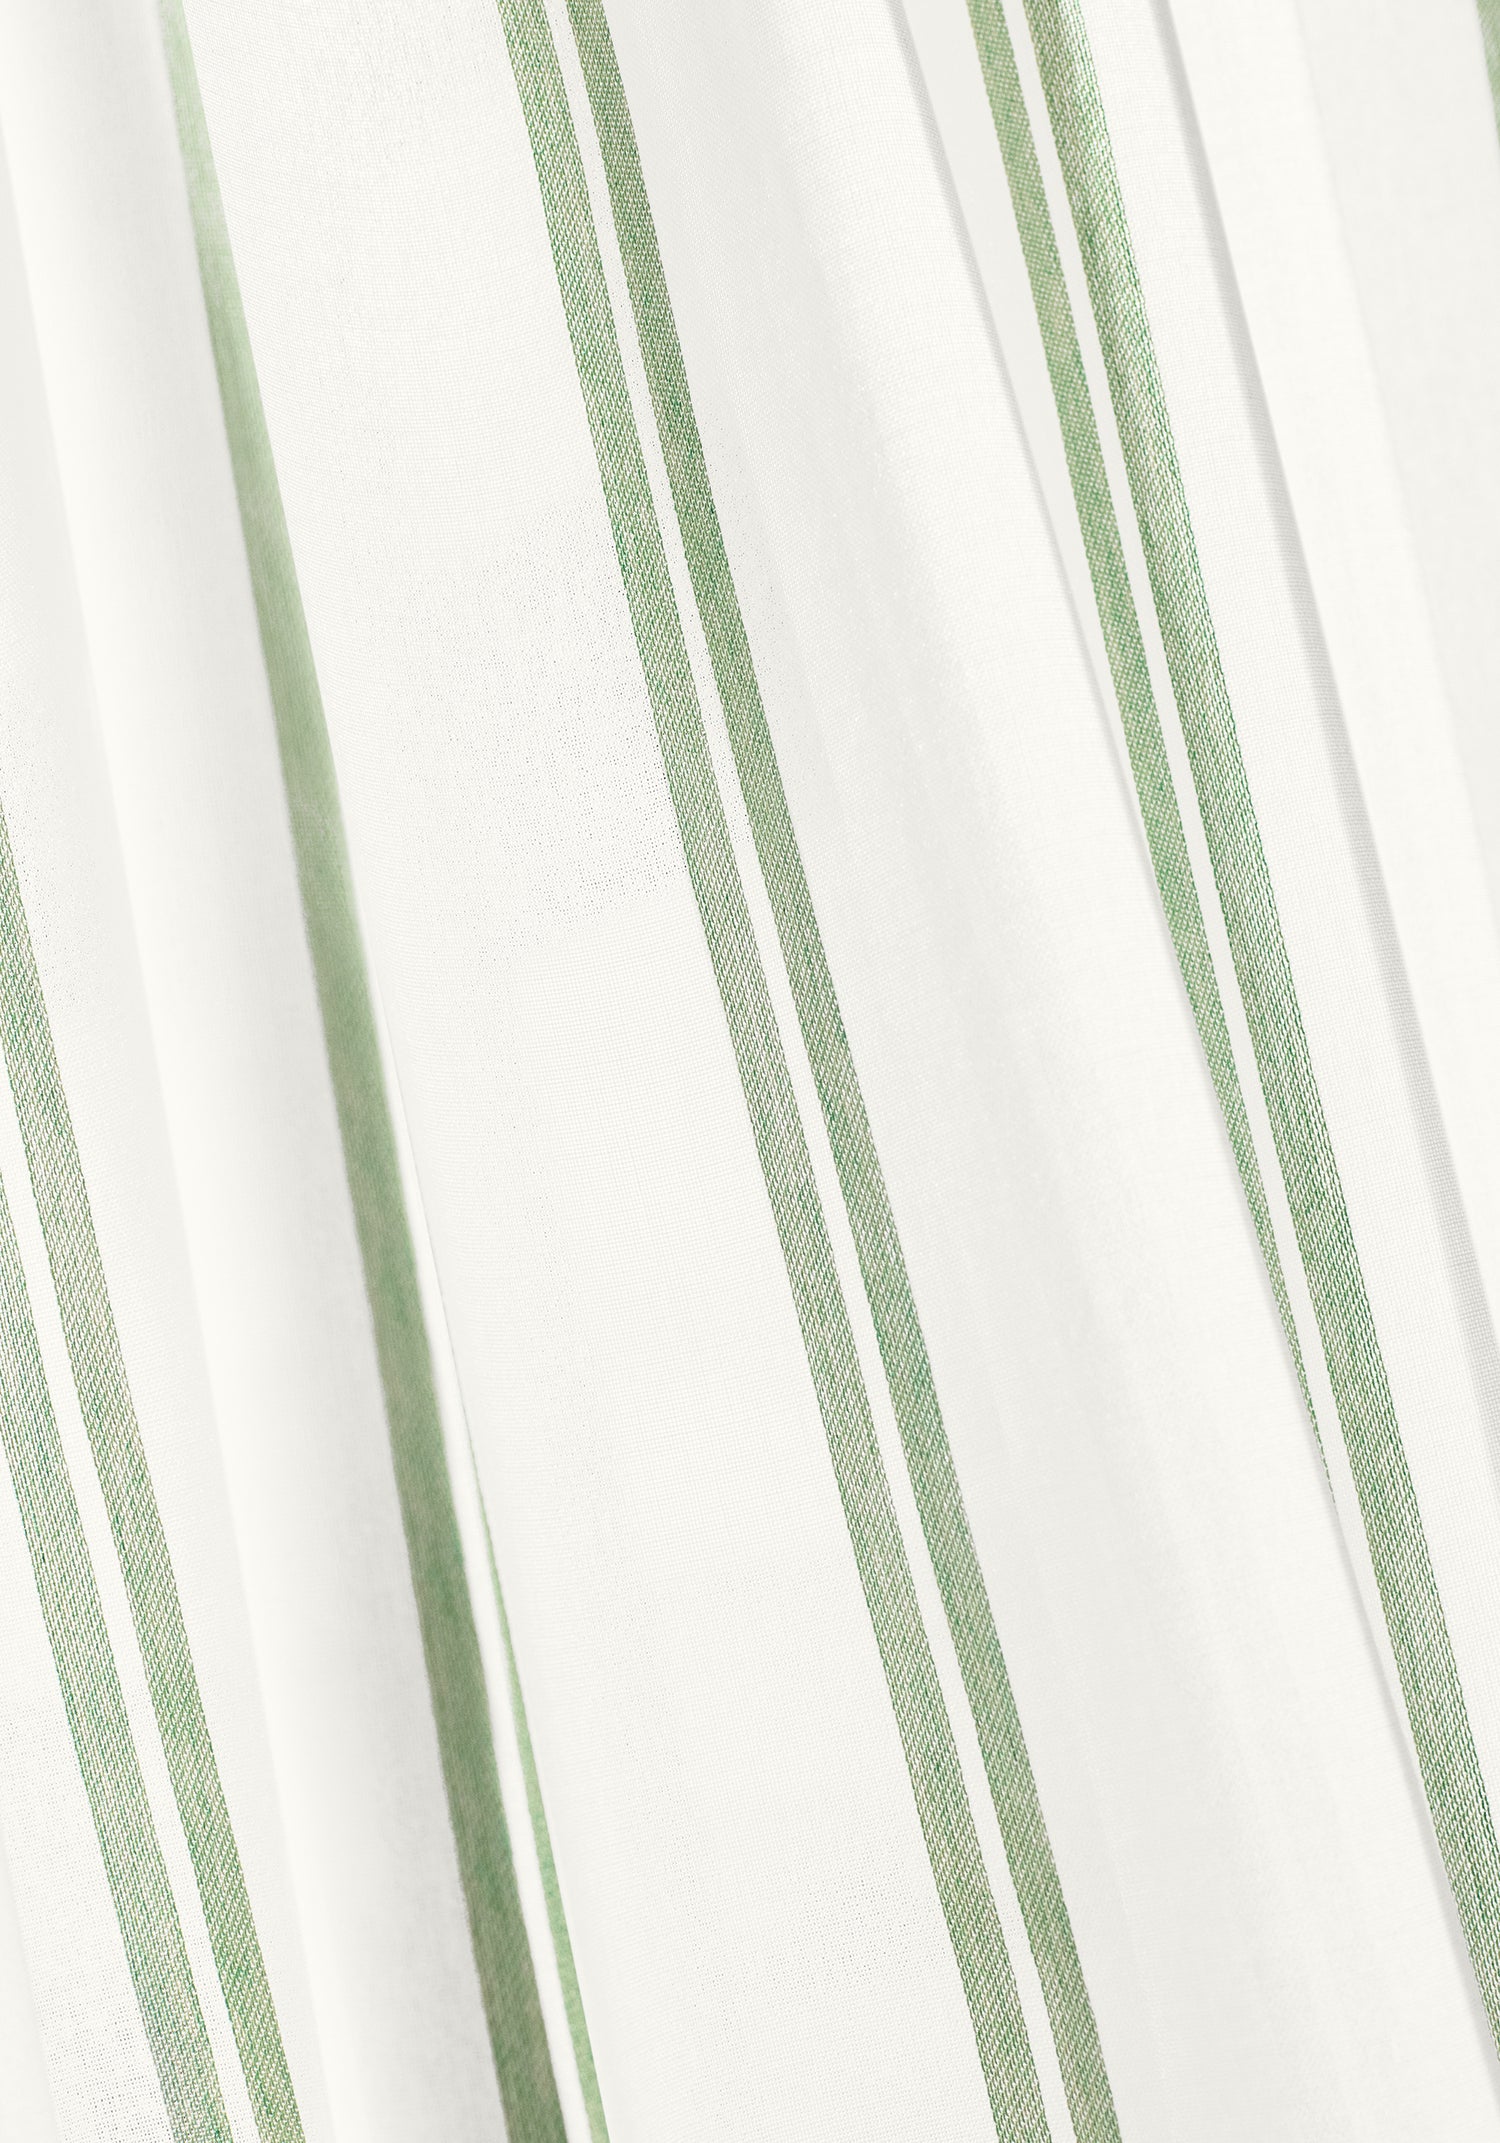 Detail of tandern stripe fabric in aloe color - pattern number FWW81748 - by Thibaut fabrics